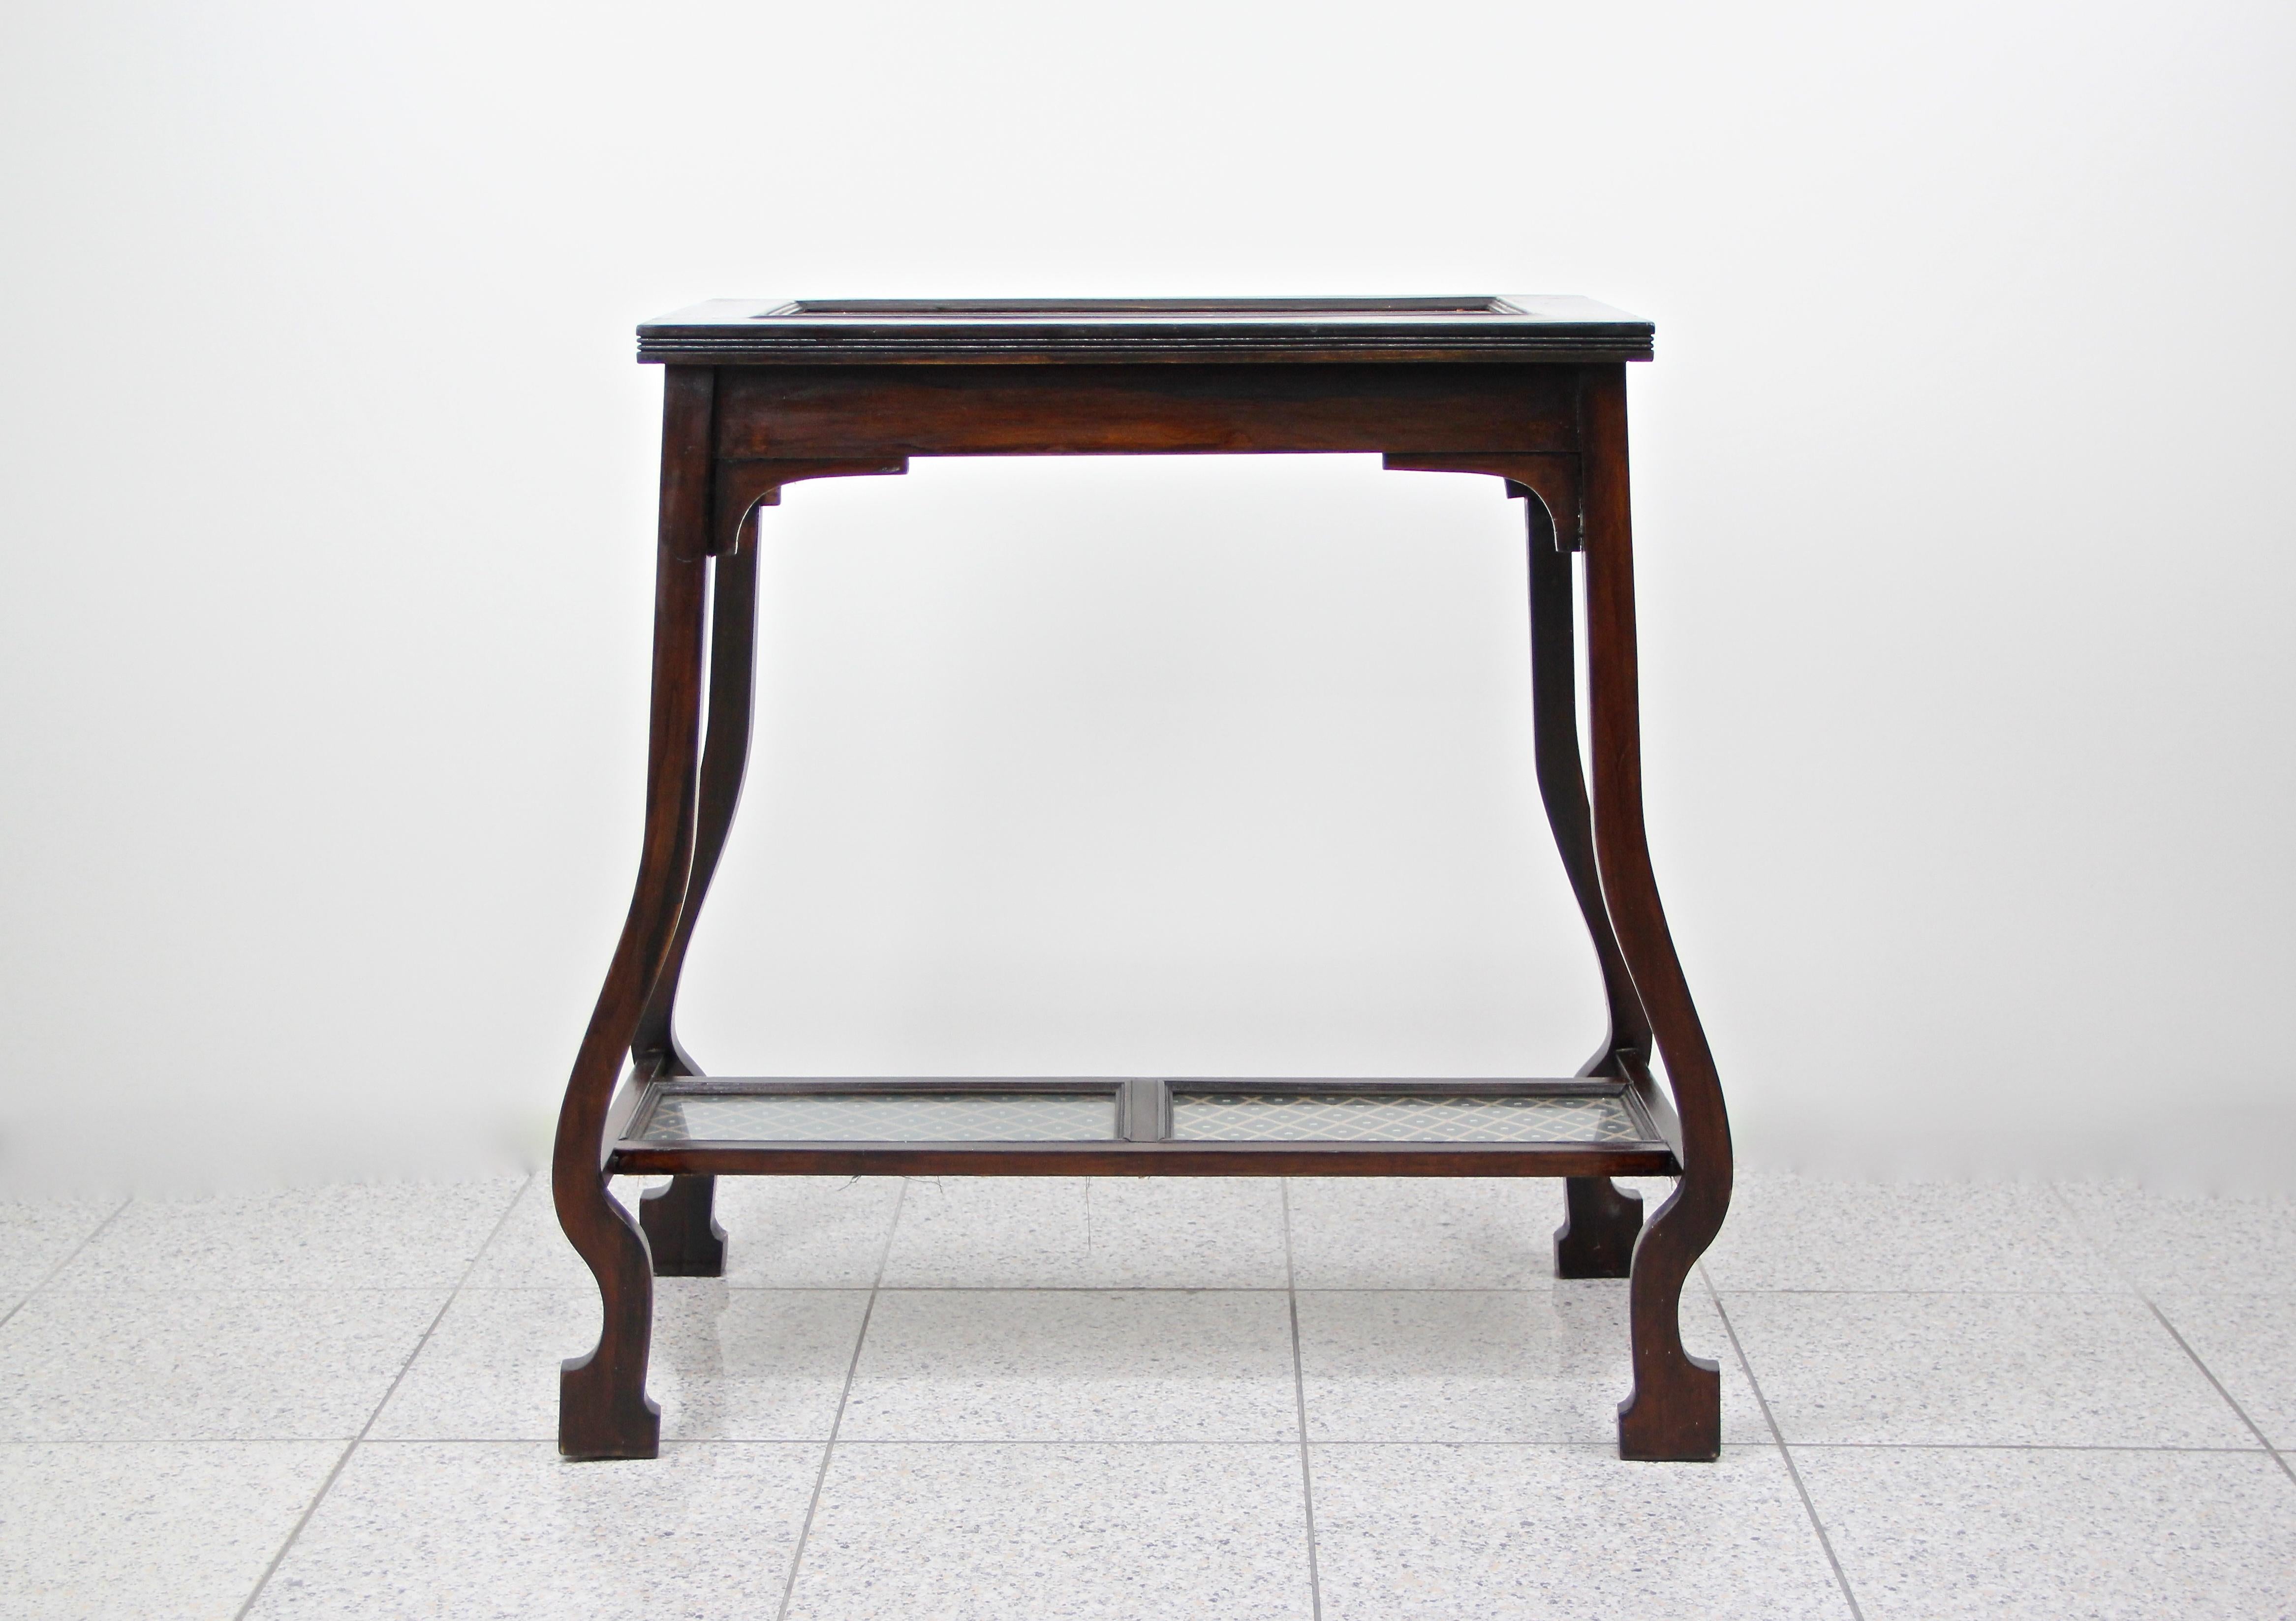 Unusual Art Nouveau side table from the early 20th century in Austria. From circa 1910 the prime of the Art Nouveau period comes this unique designed beech wood table, trimmed to a beautiful dark brown nearly black tone. The top plate as well as the